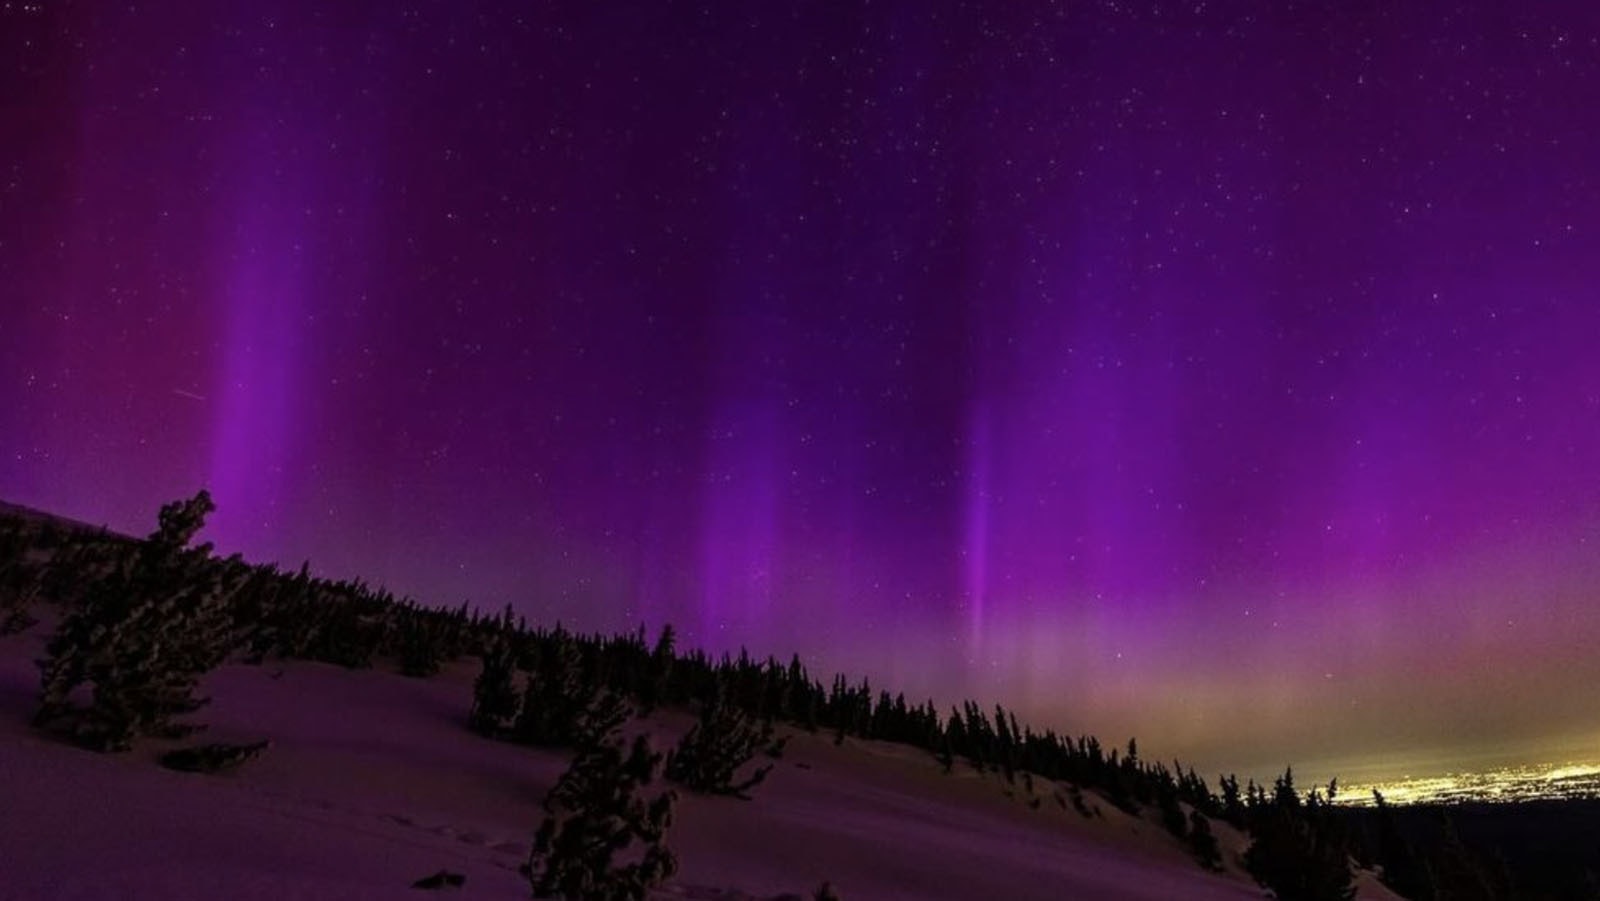 The northern lights featured a wide variety of colors including deep purple.